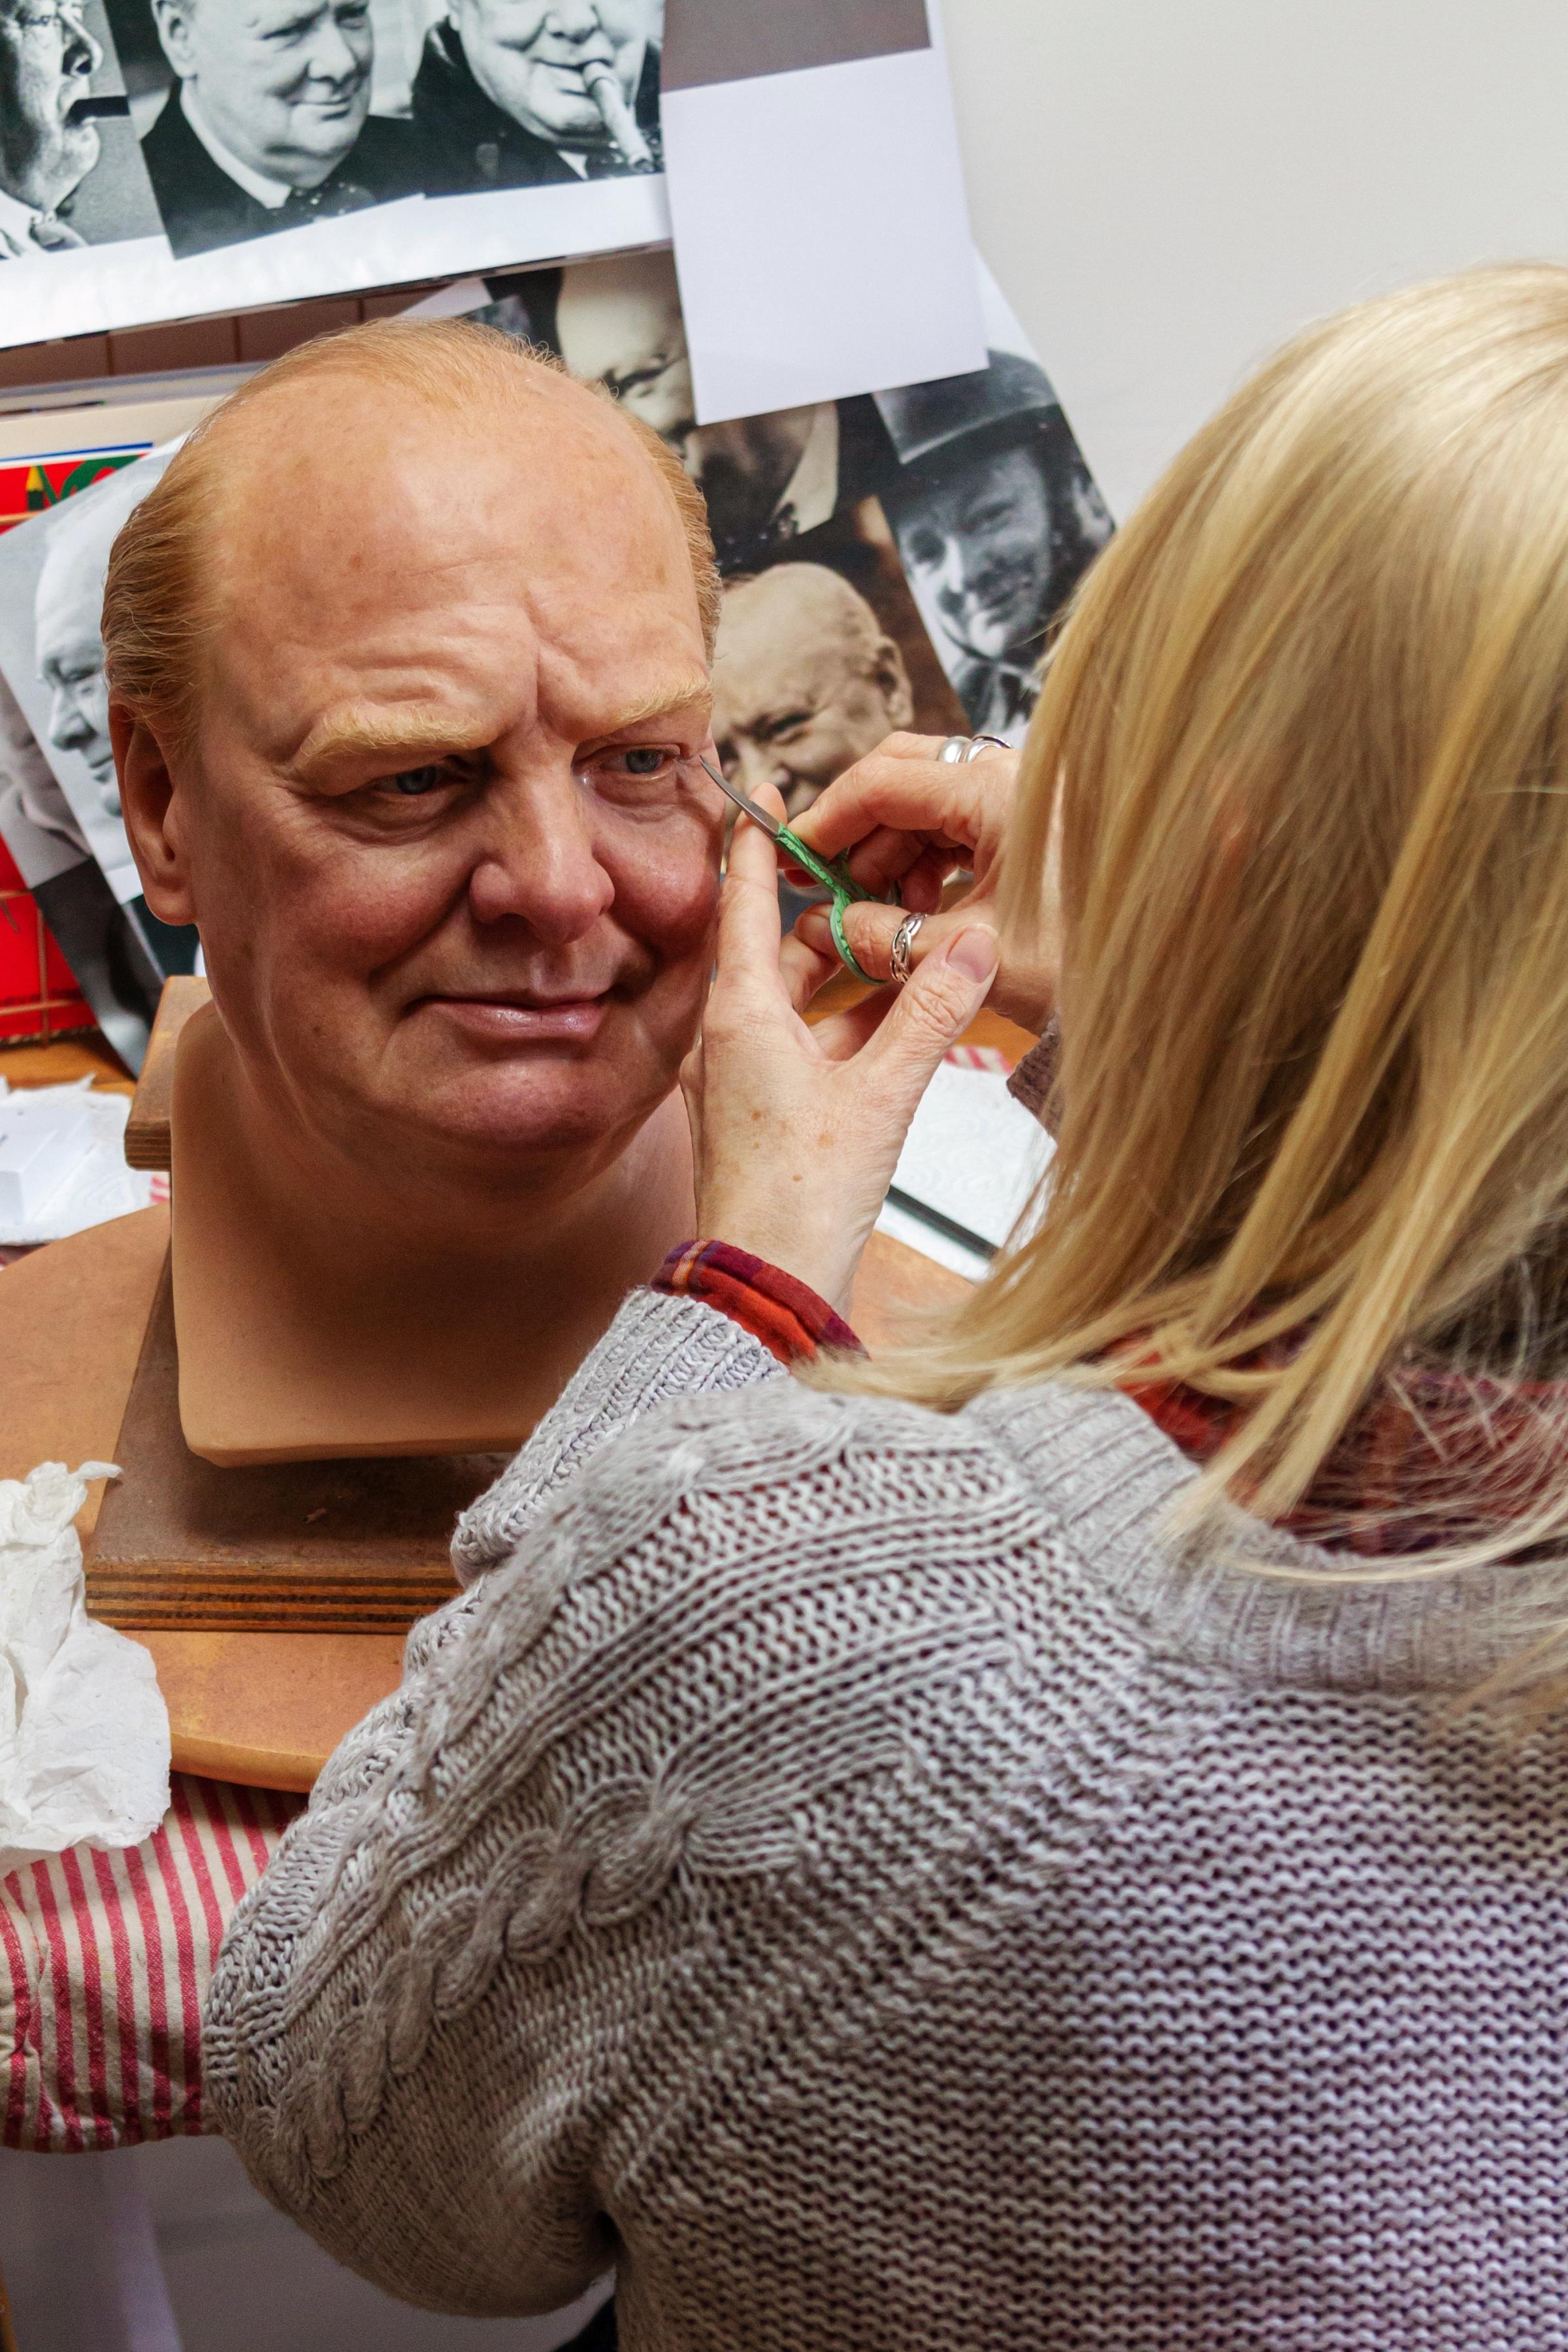 Artist Sue Day works on the waxwork model of Sir Winston Churchill Picture: Blenheim Palace 